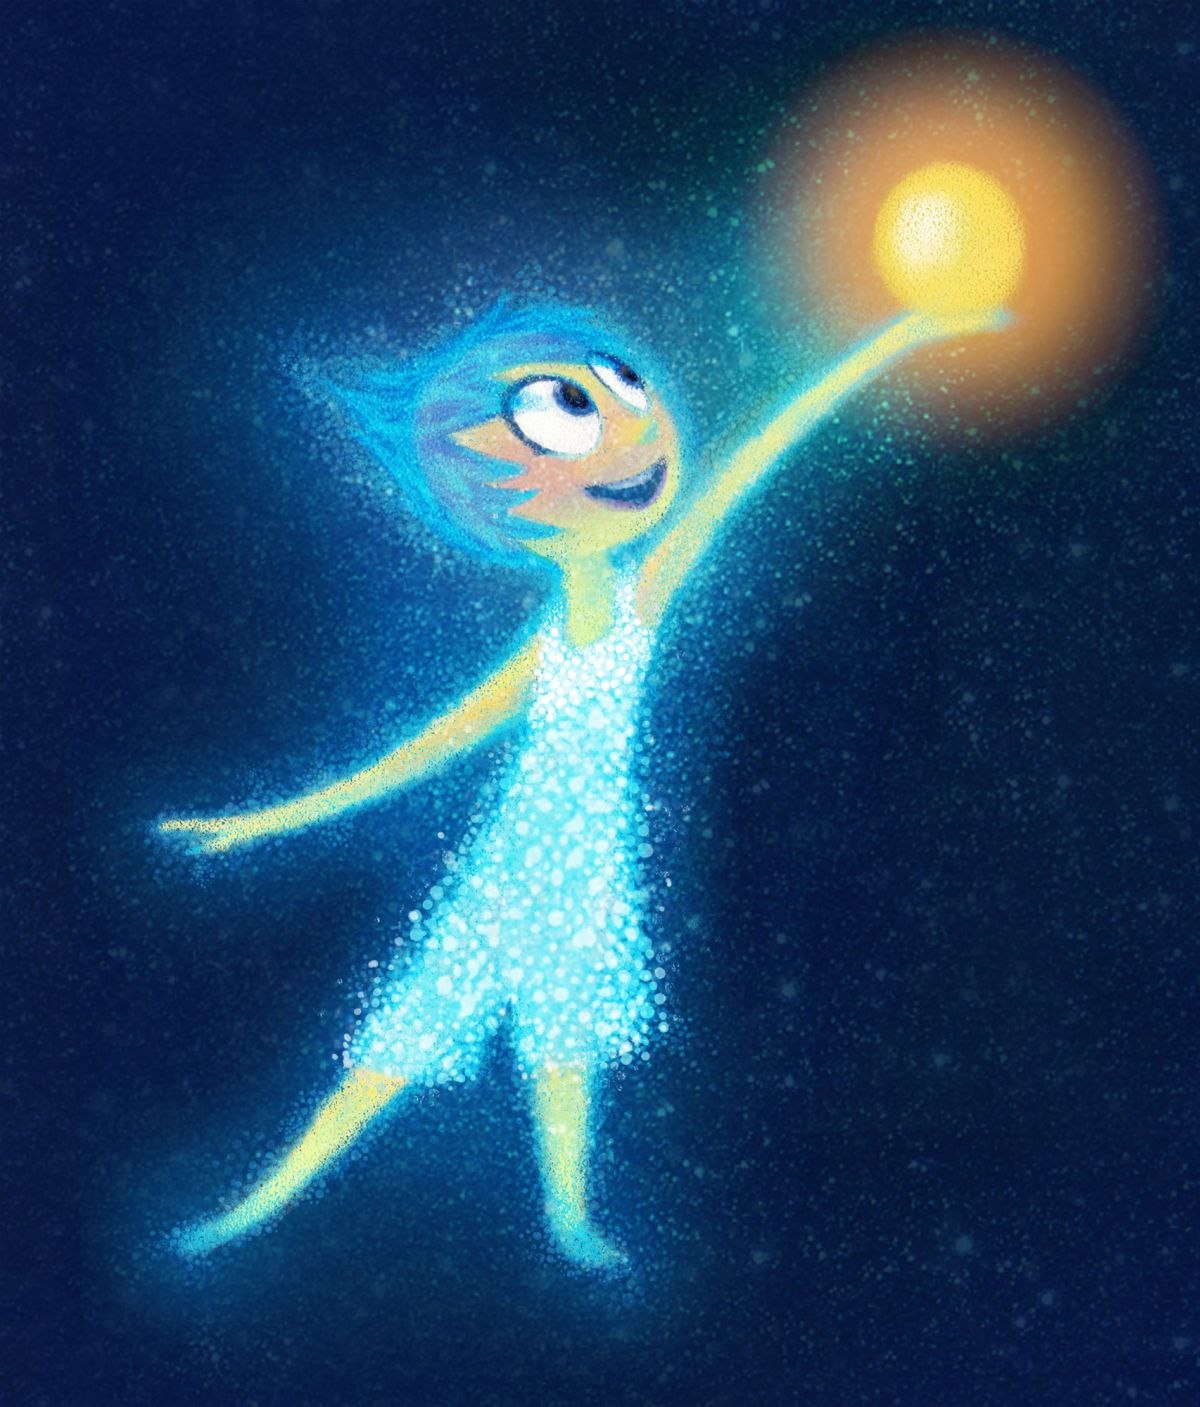 Gallery Pixar's 'Inside Out' Concept Art and Console Progression